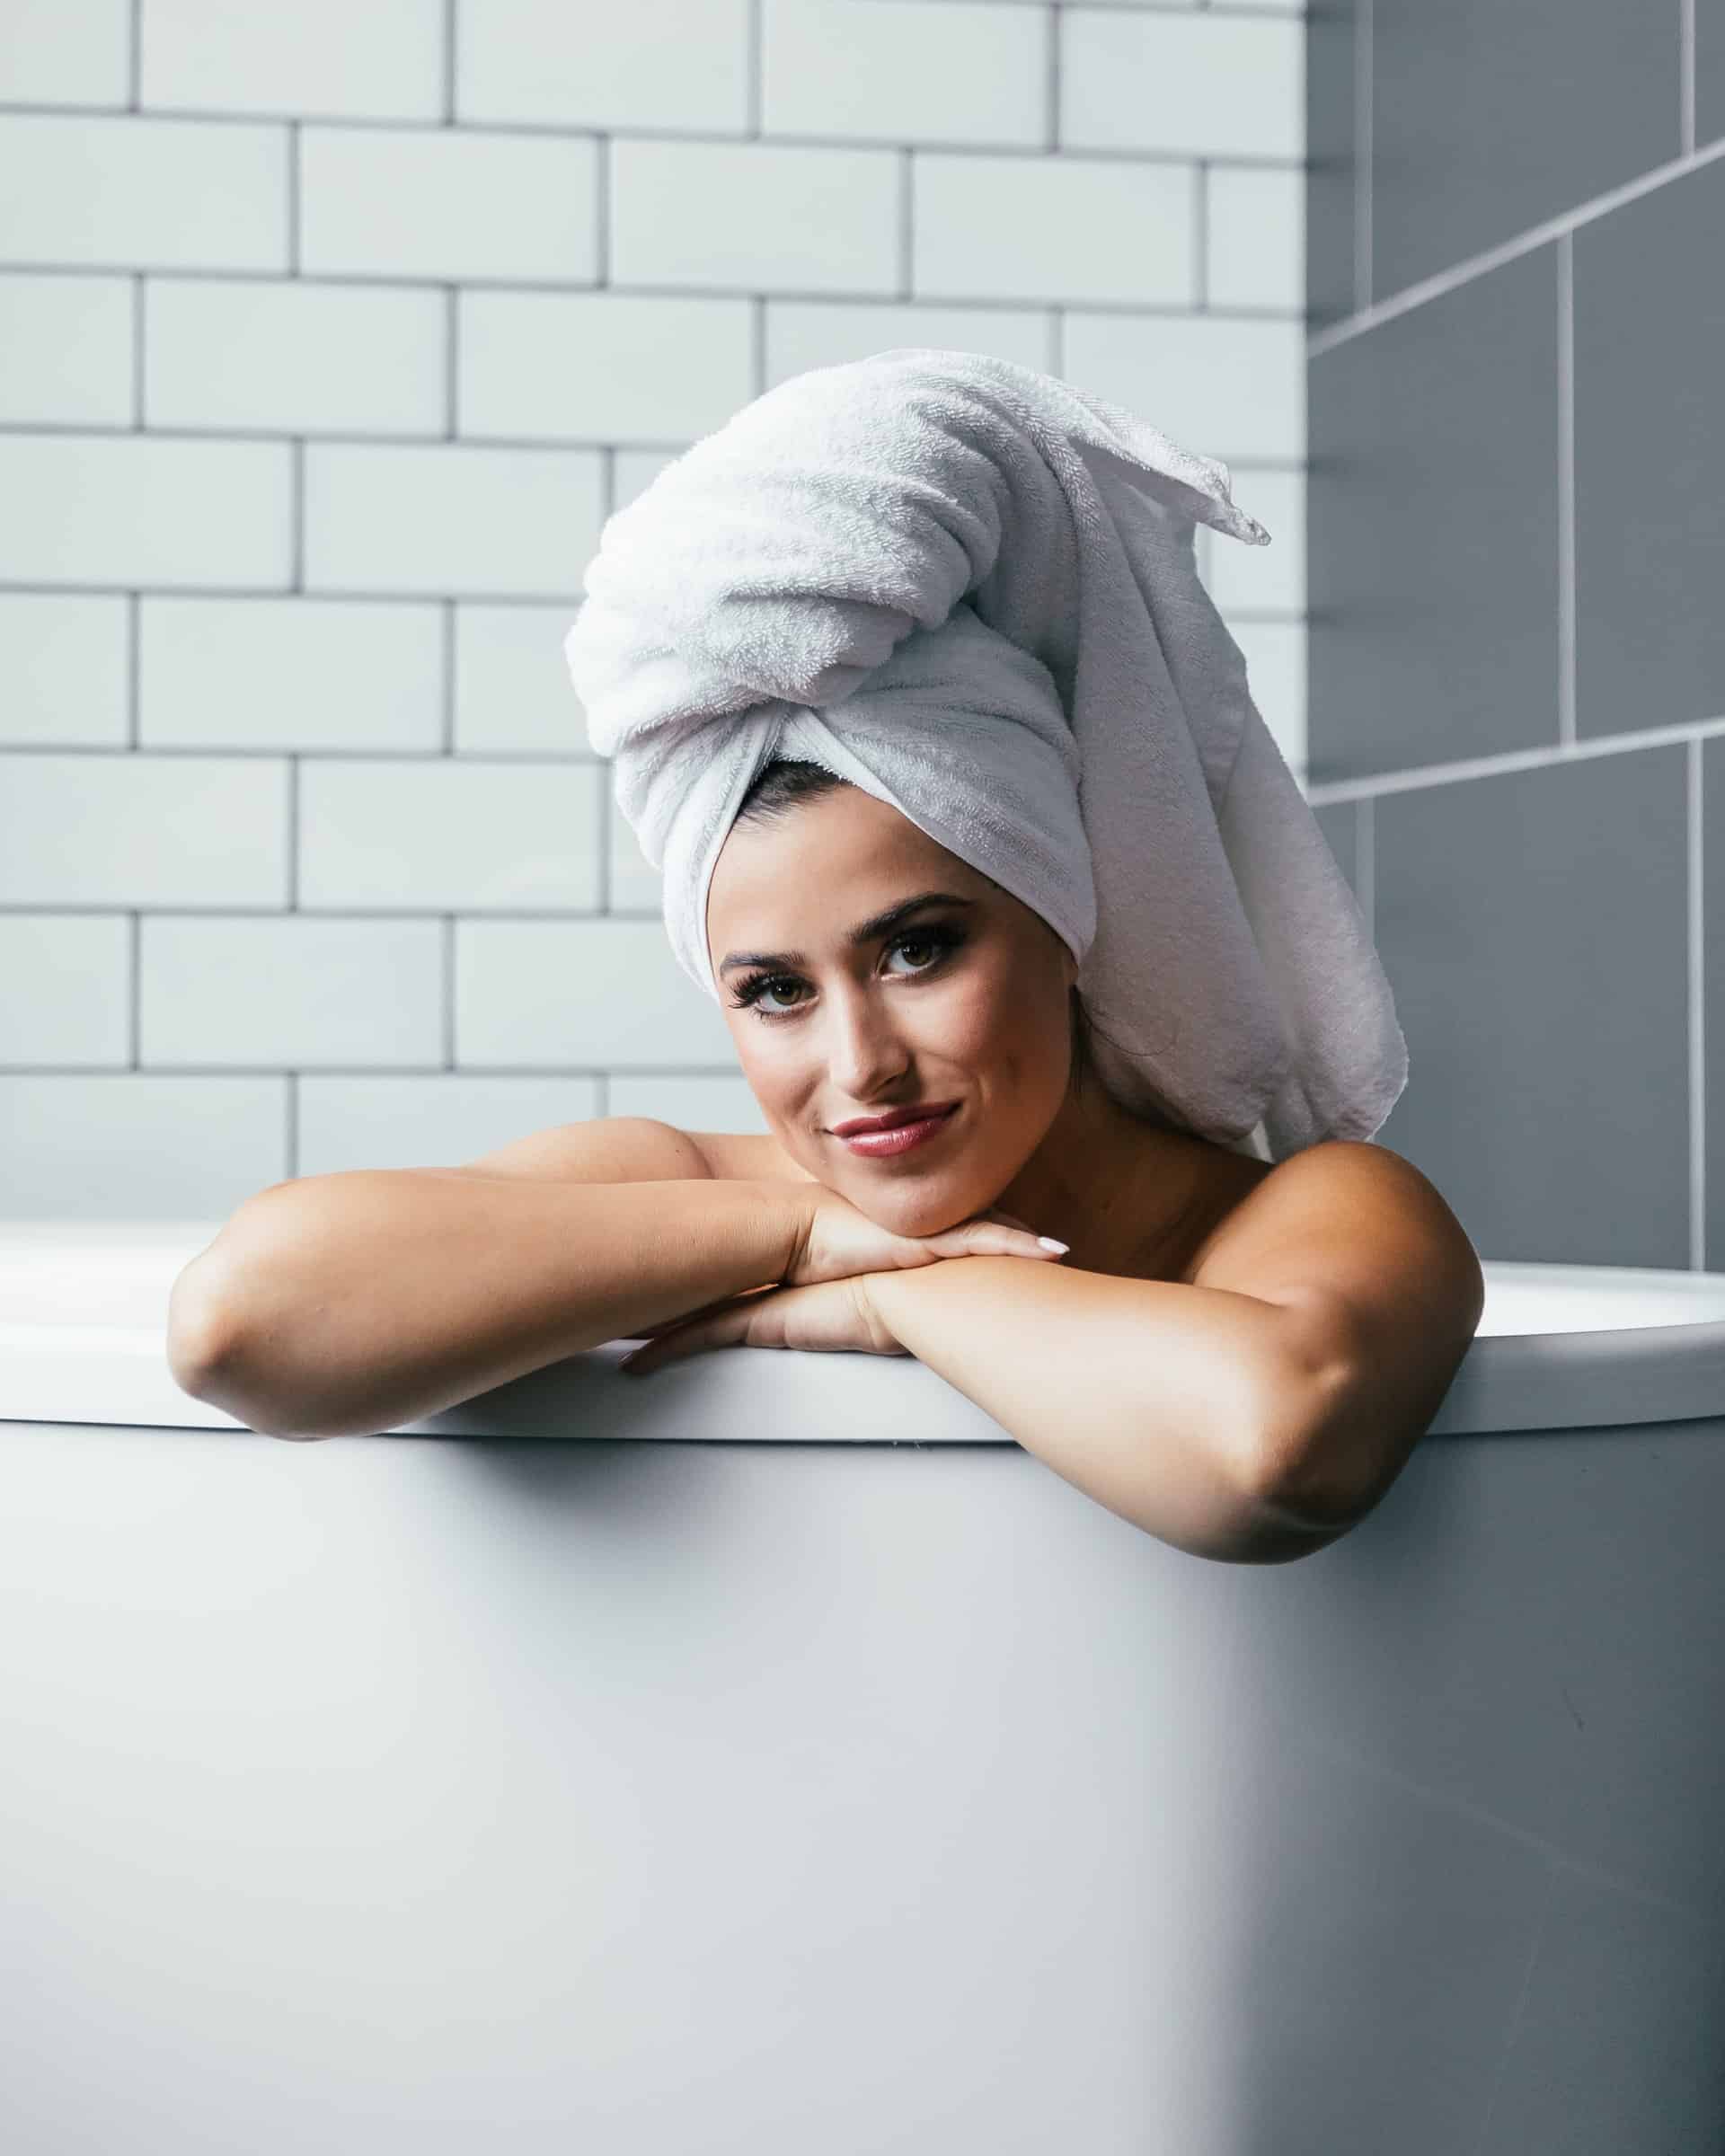 Washing hair with water alone – a rescue for damaged hair. Does it work?